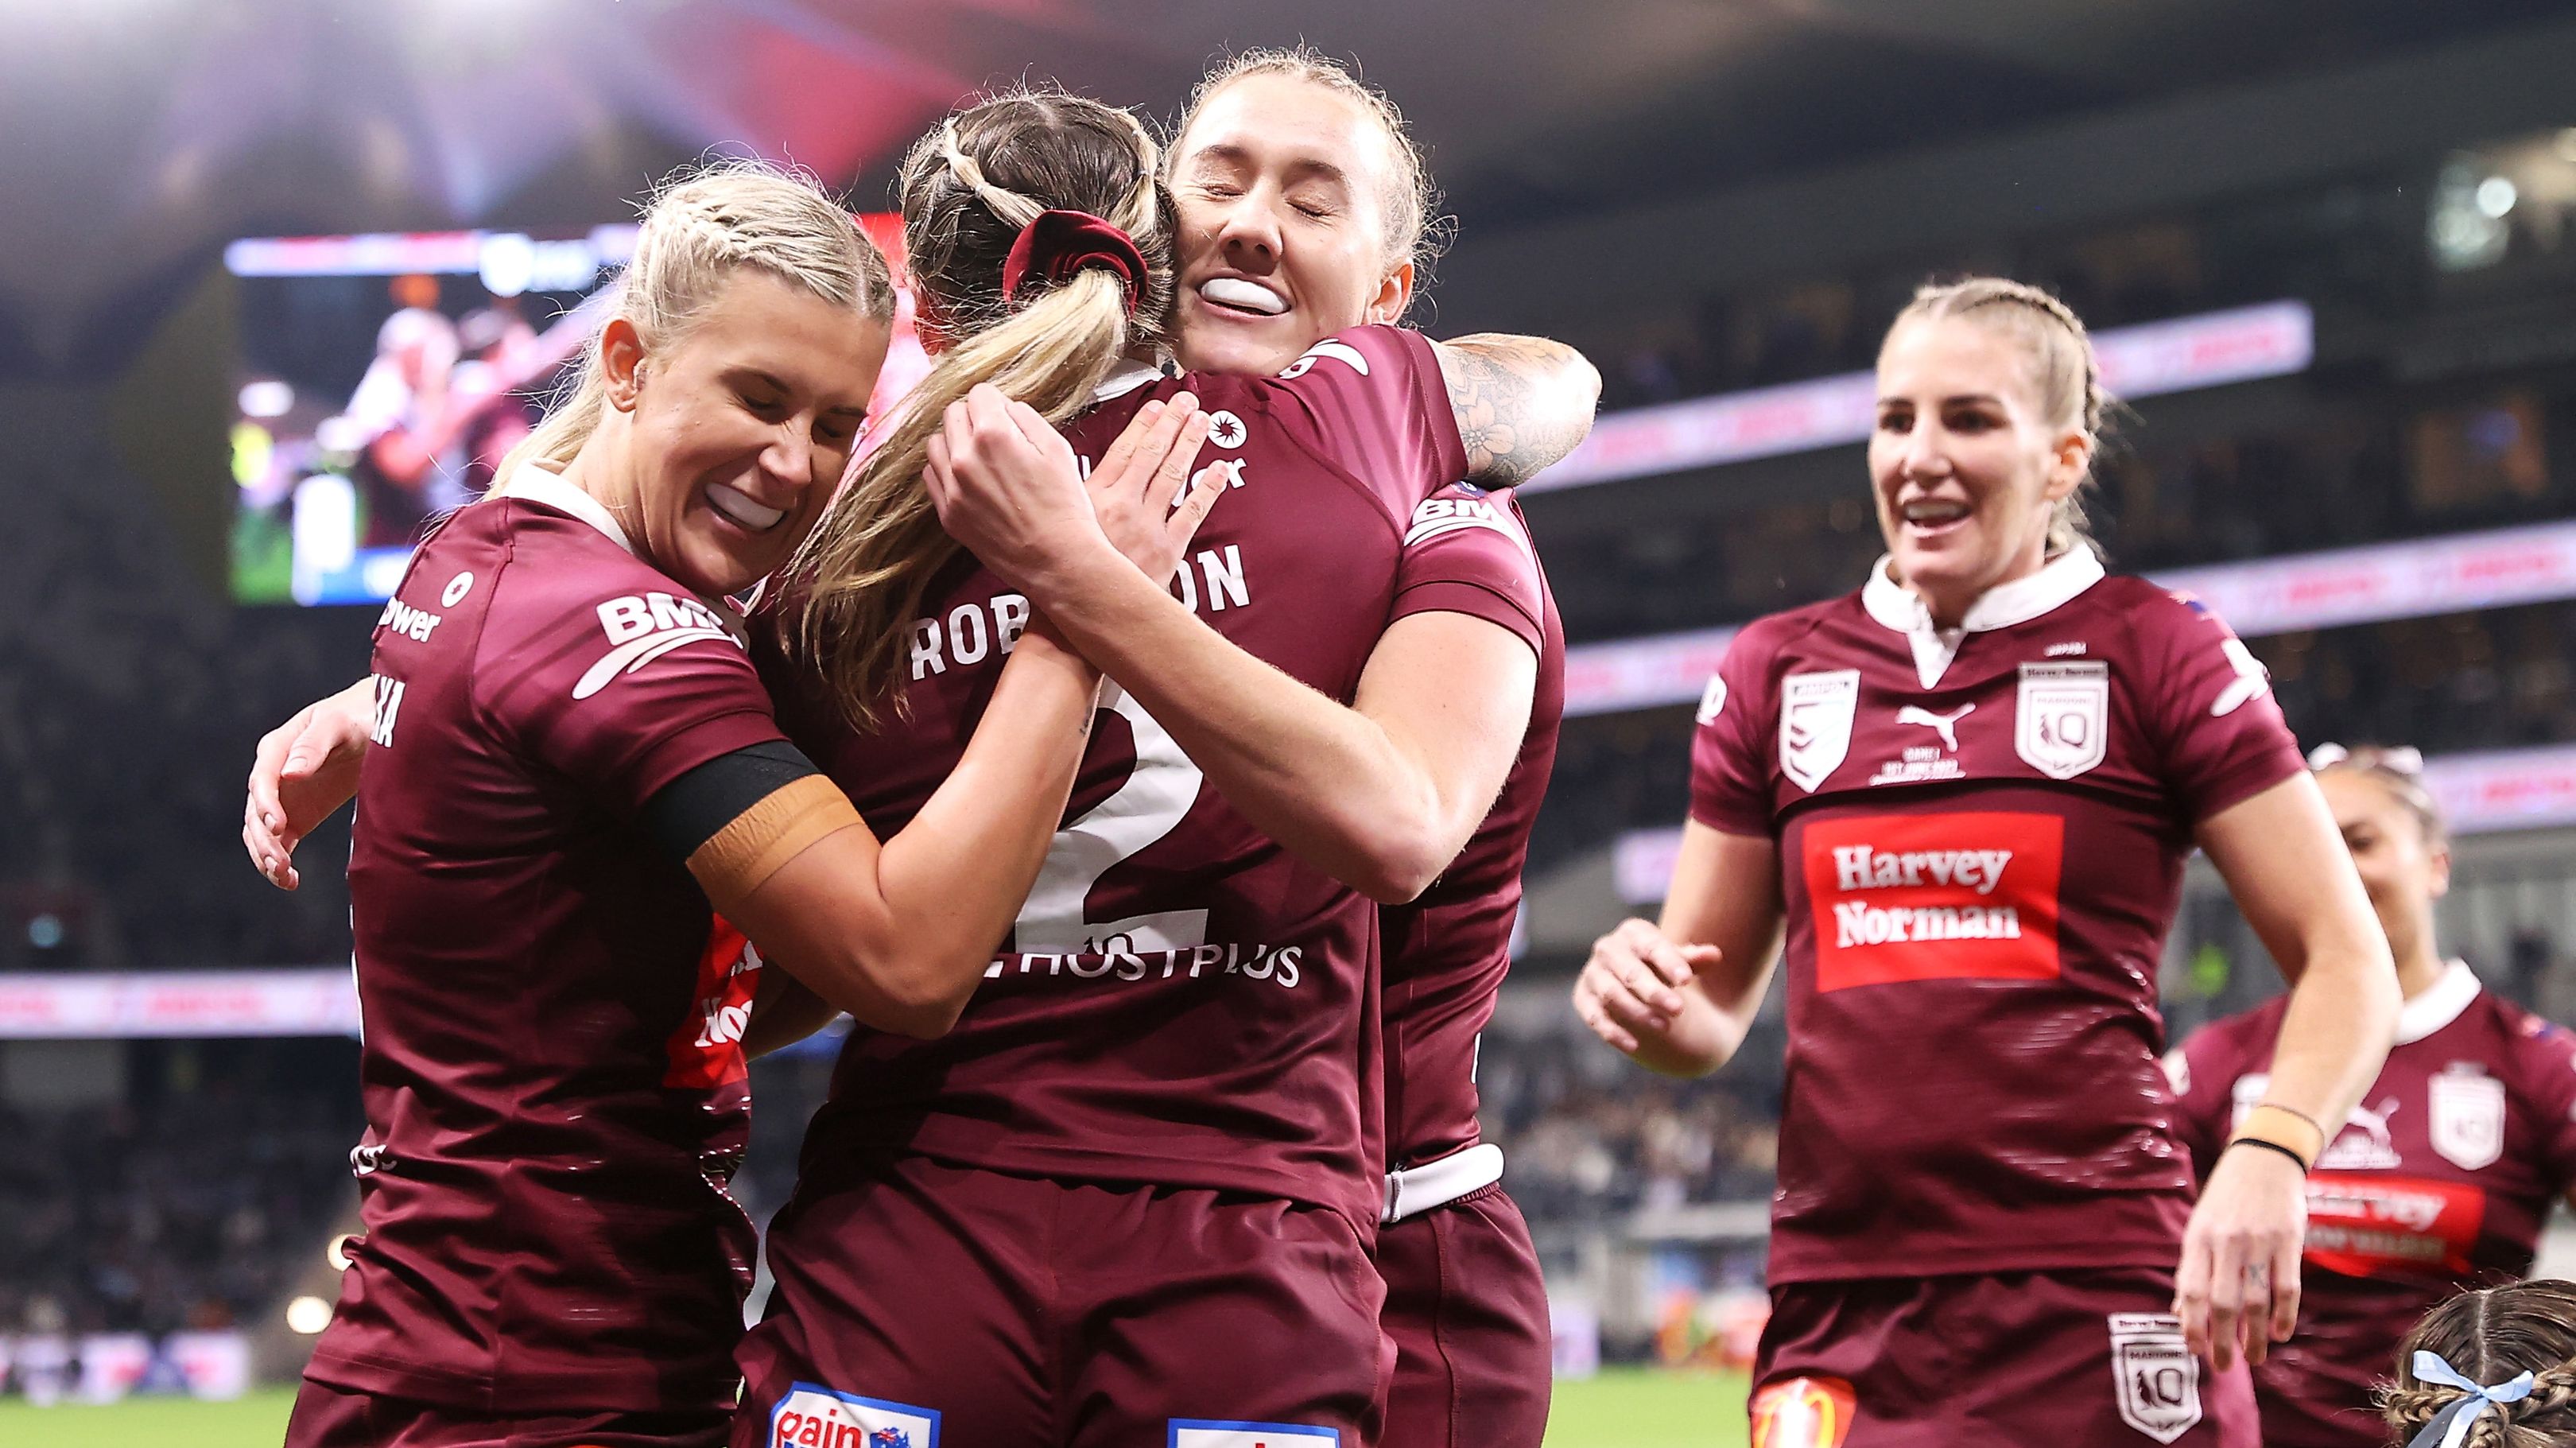 SYDNEY, AUSTRALIA - JUNE 01: Julia Robinson of the Maroons celebrates with her team mates after scoring a try during game one of the Women&#x27;s State of Origin series between New South Wales and Queensland at CommBank Stadium on June 01, 2023 in Sydney, Australia. (Photo by Mark Kolbe/Getty Images)